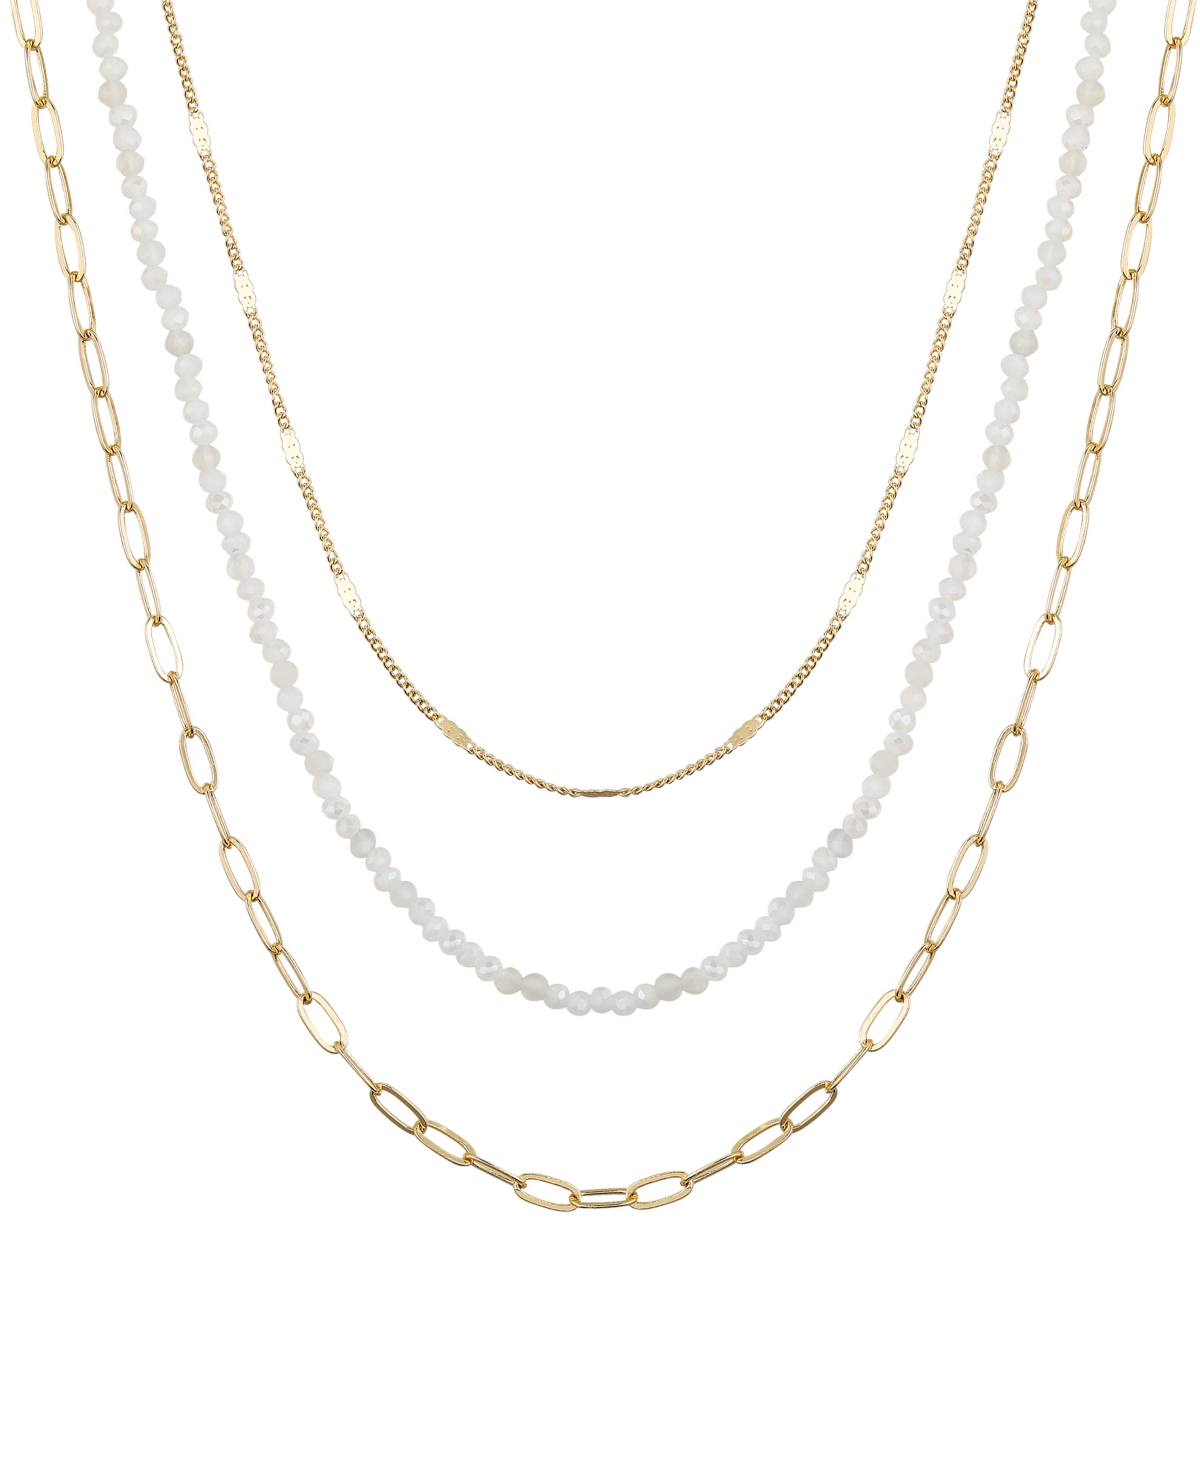 Unwritten Genuine Glass Stone And 14k Gold Plated Layered Necklace Set, 3 Pieces In White